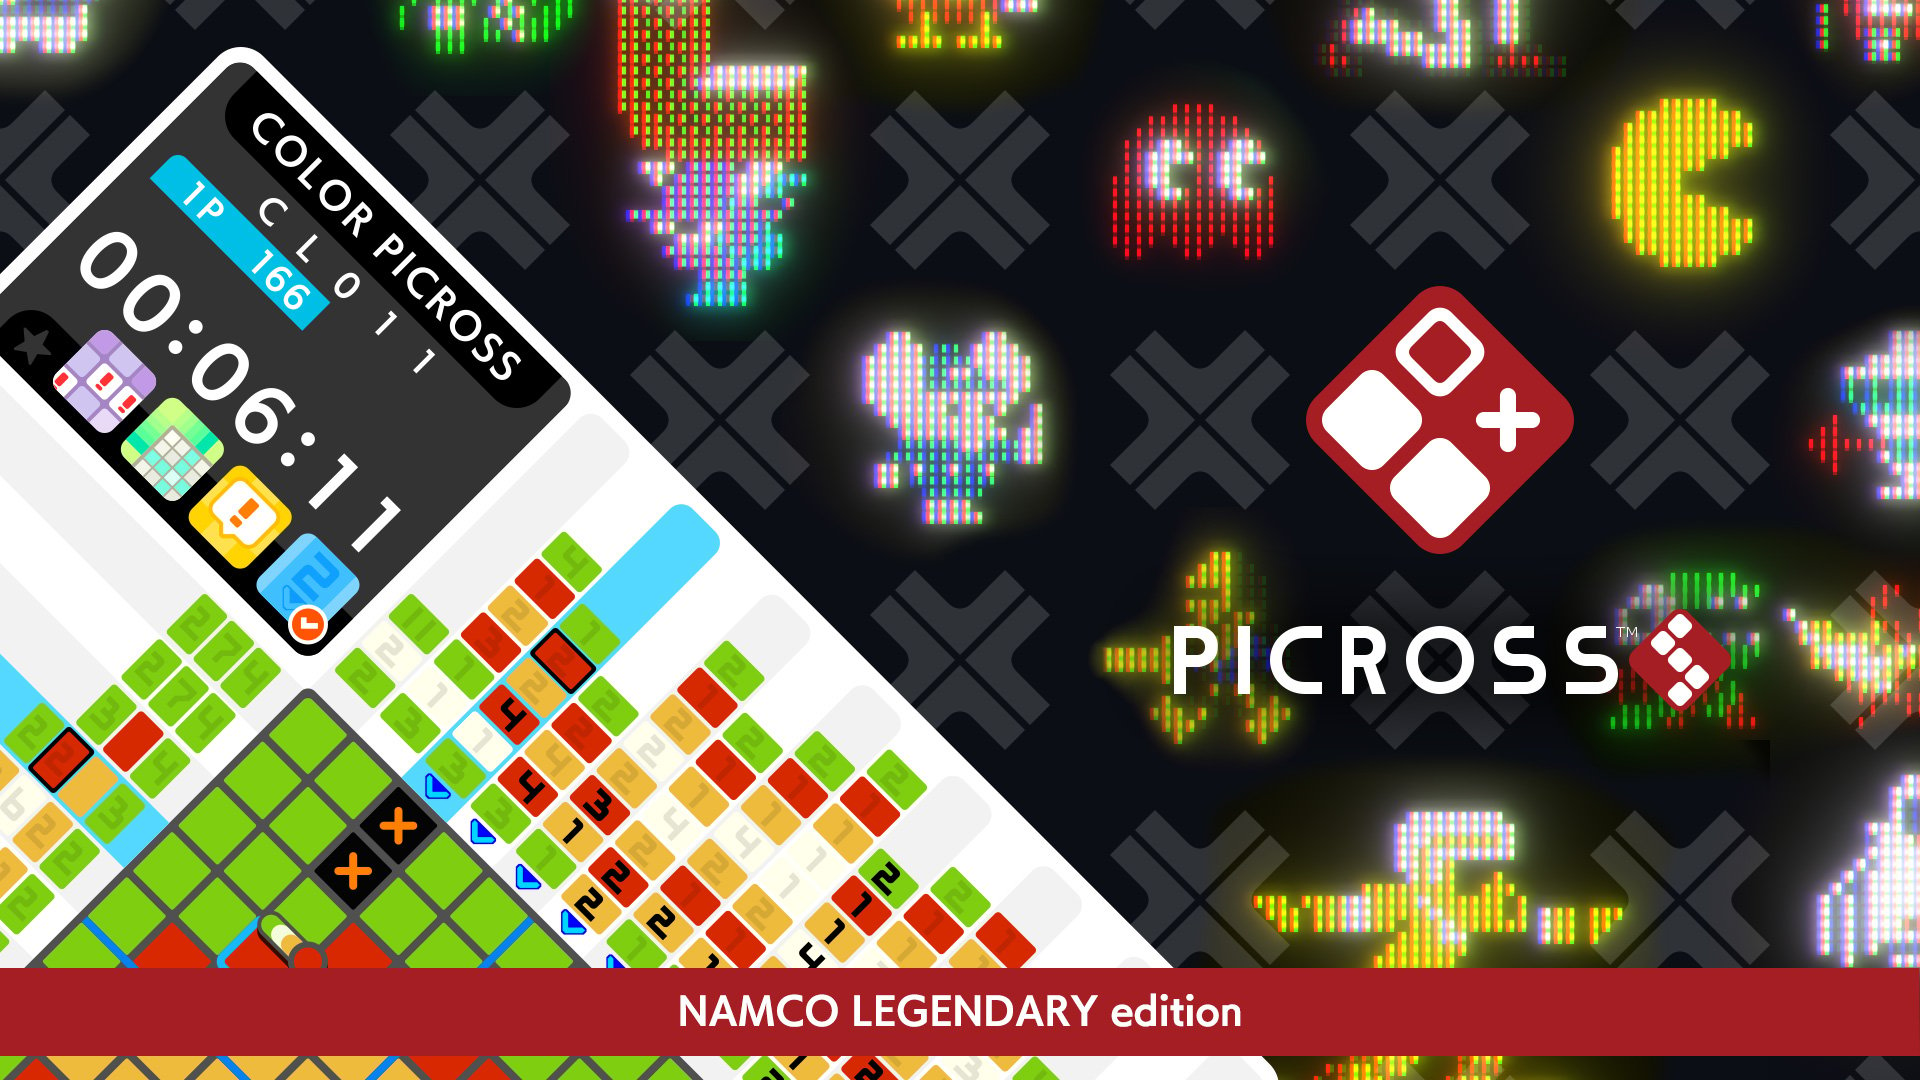 #
      Picross S Namco Legendary edition announced for Switch